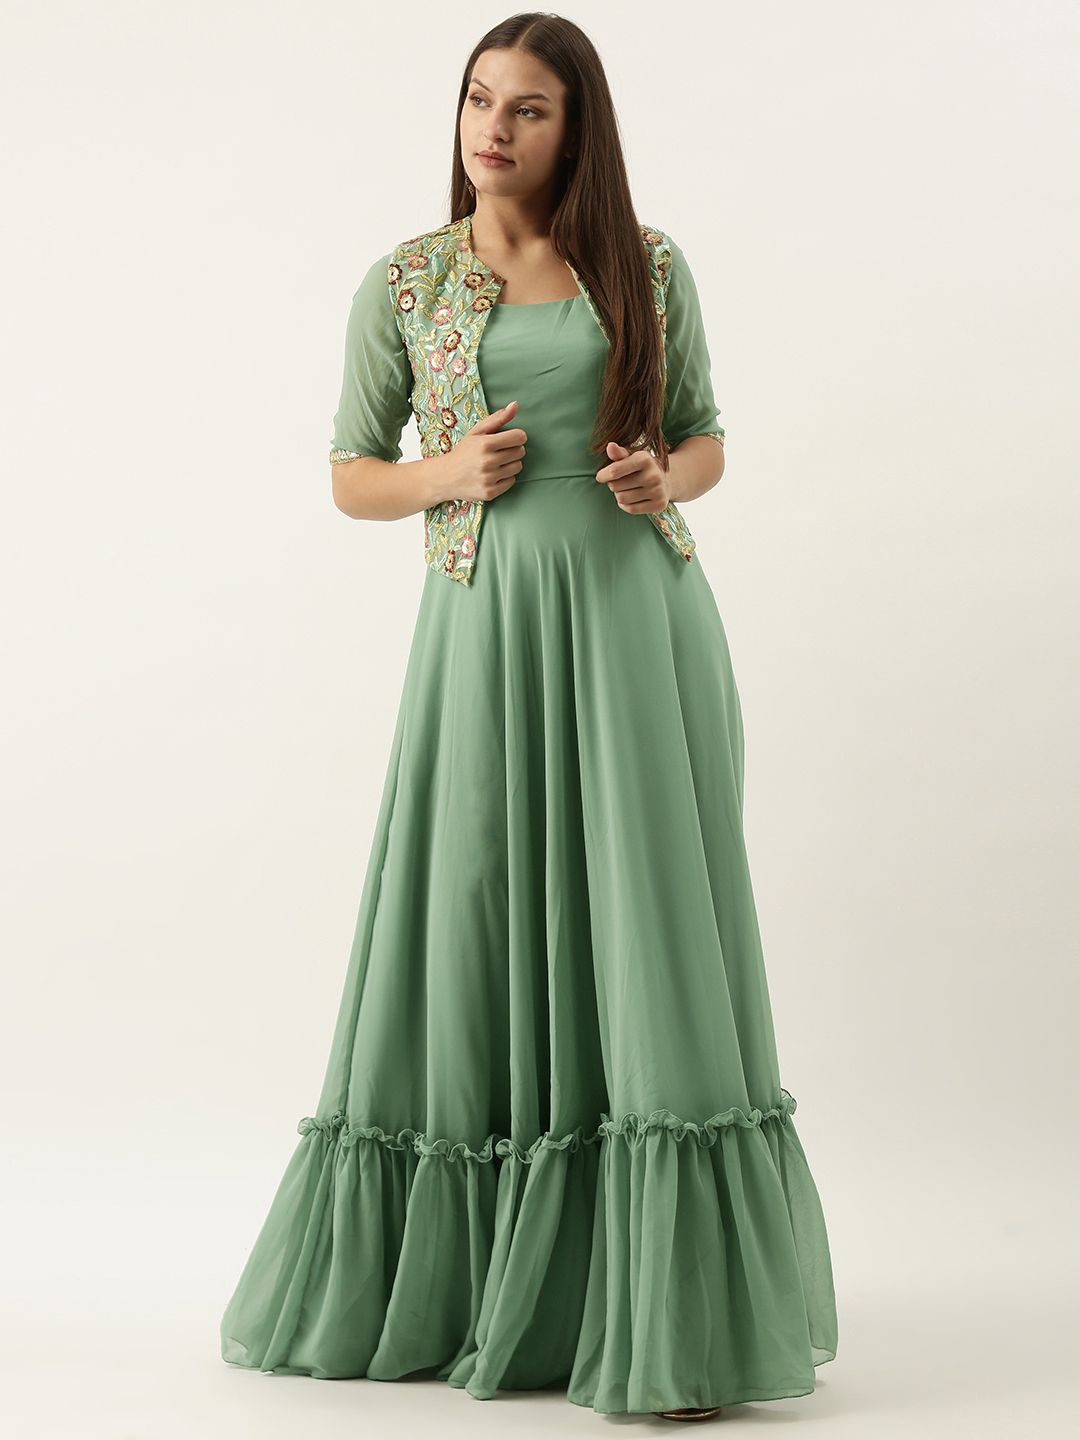 EthnoVogue Green & Golden Solid Georgette Ethnic Maxi Dress With Jacket Price in India